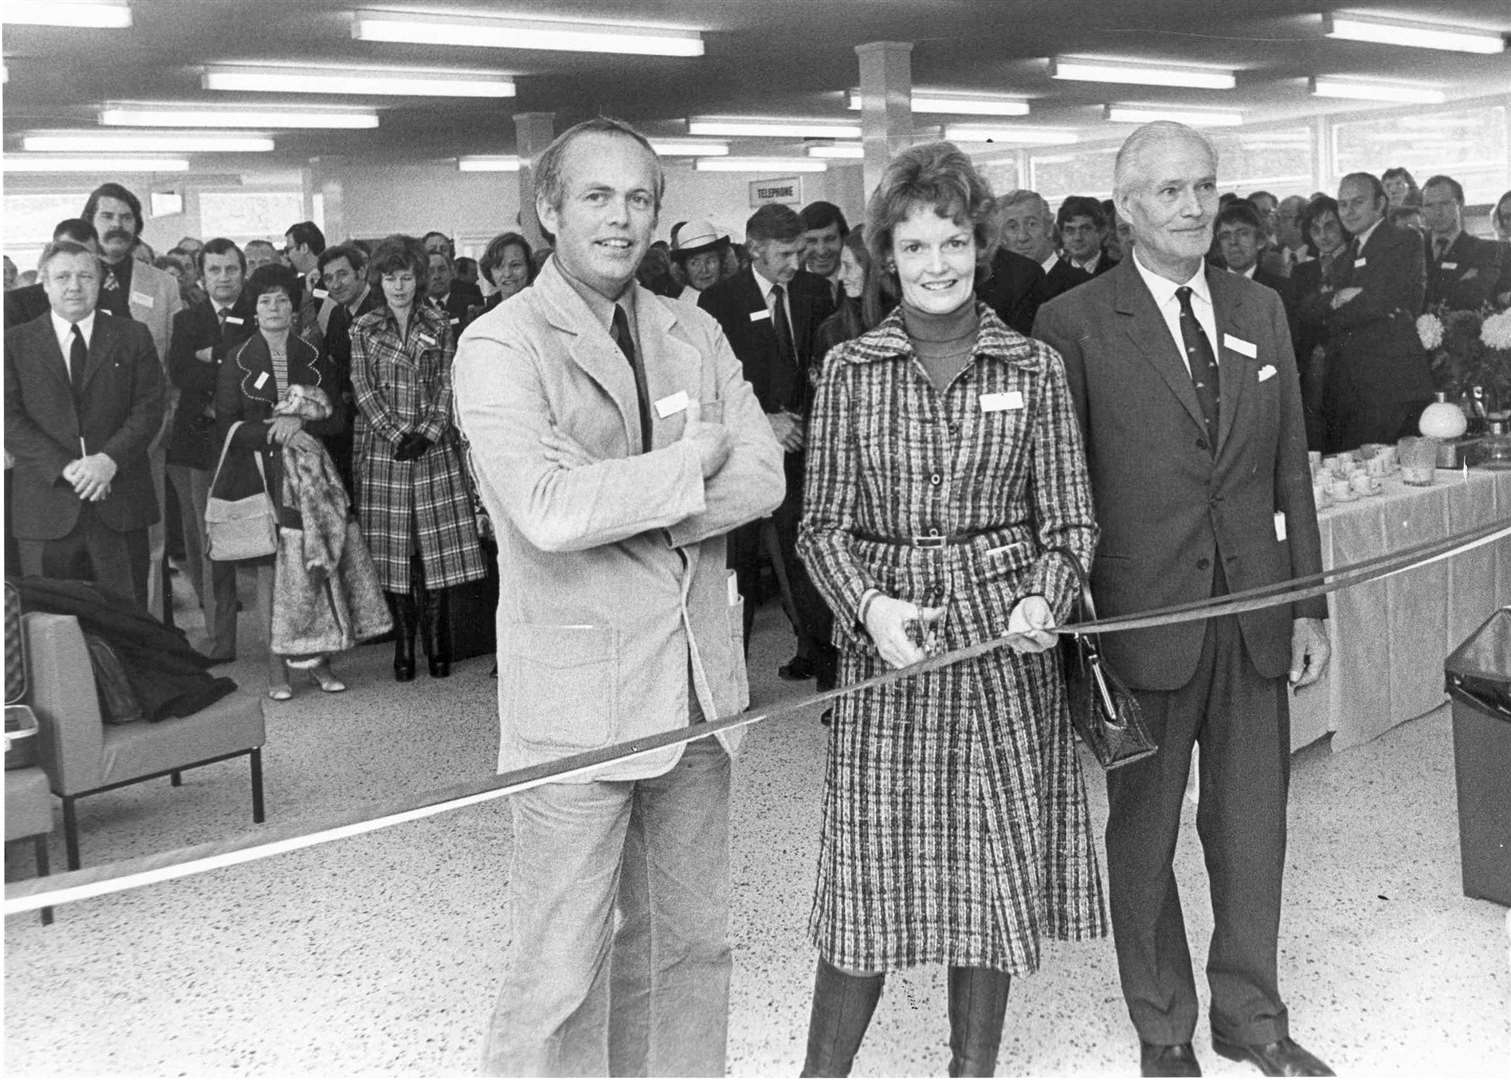 Shelagh Cooper cuts the tape to open the new passenger terminal at Sheerness Docks in 1975, watched by Ole Lauritzen, founder of the Olau-Line, and Mr N Staff, chairman Medway & Sheerness Ports Authority